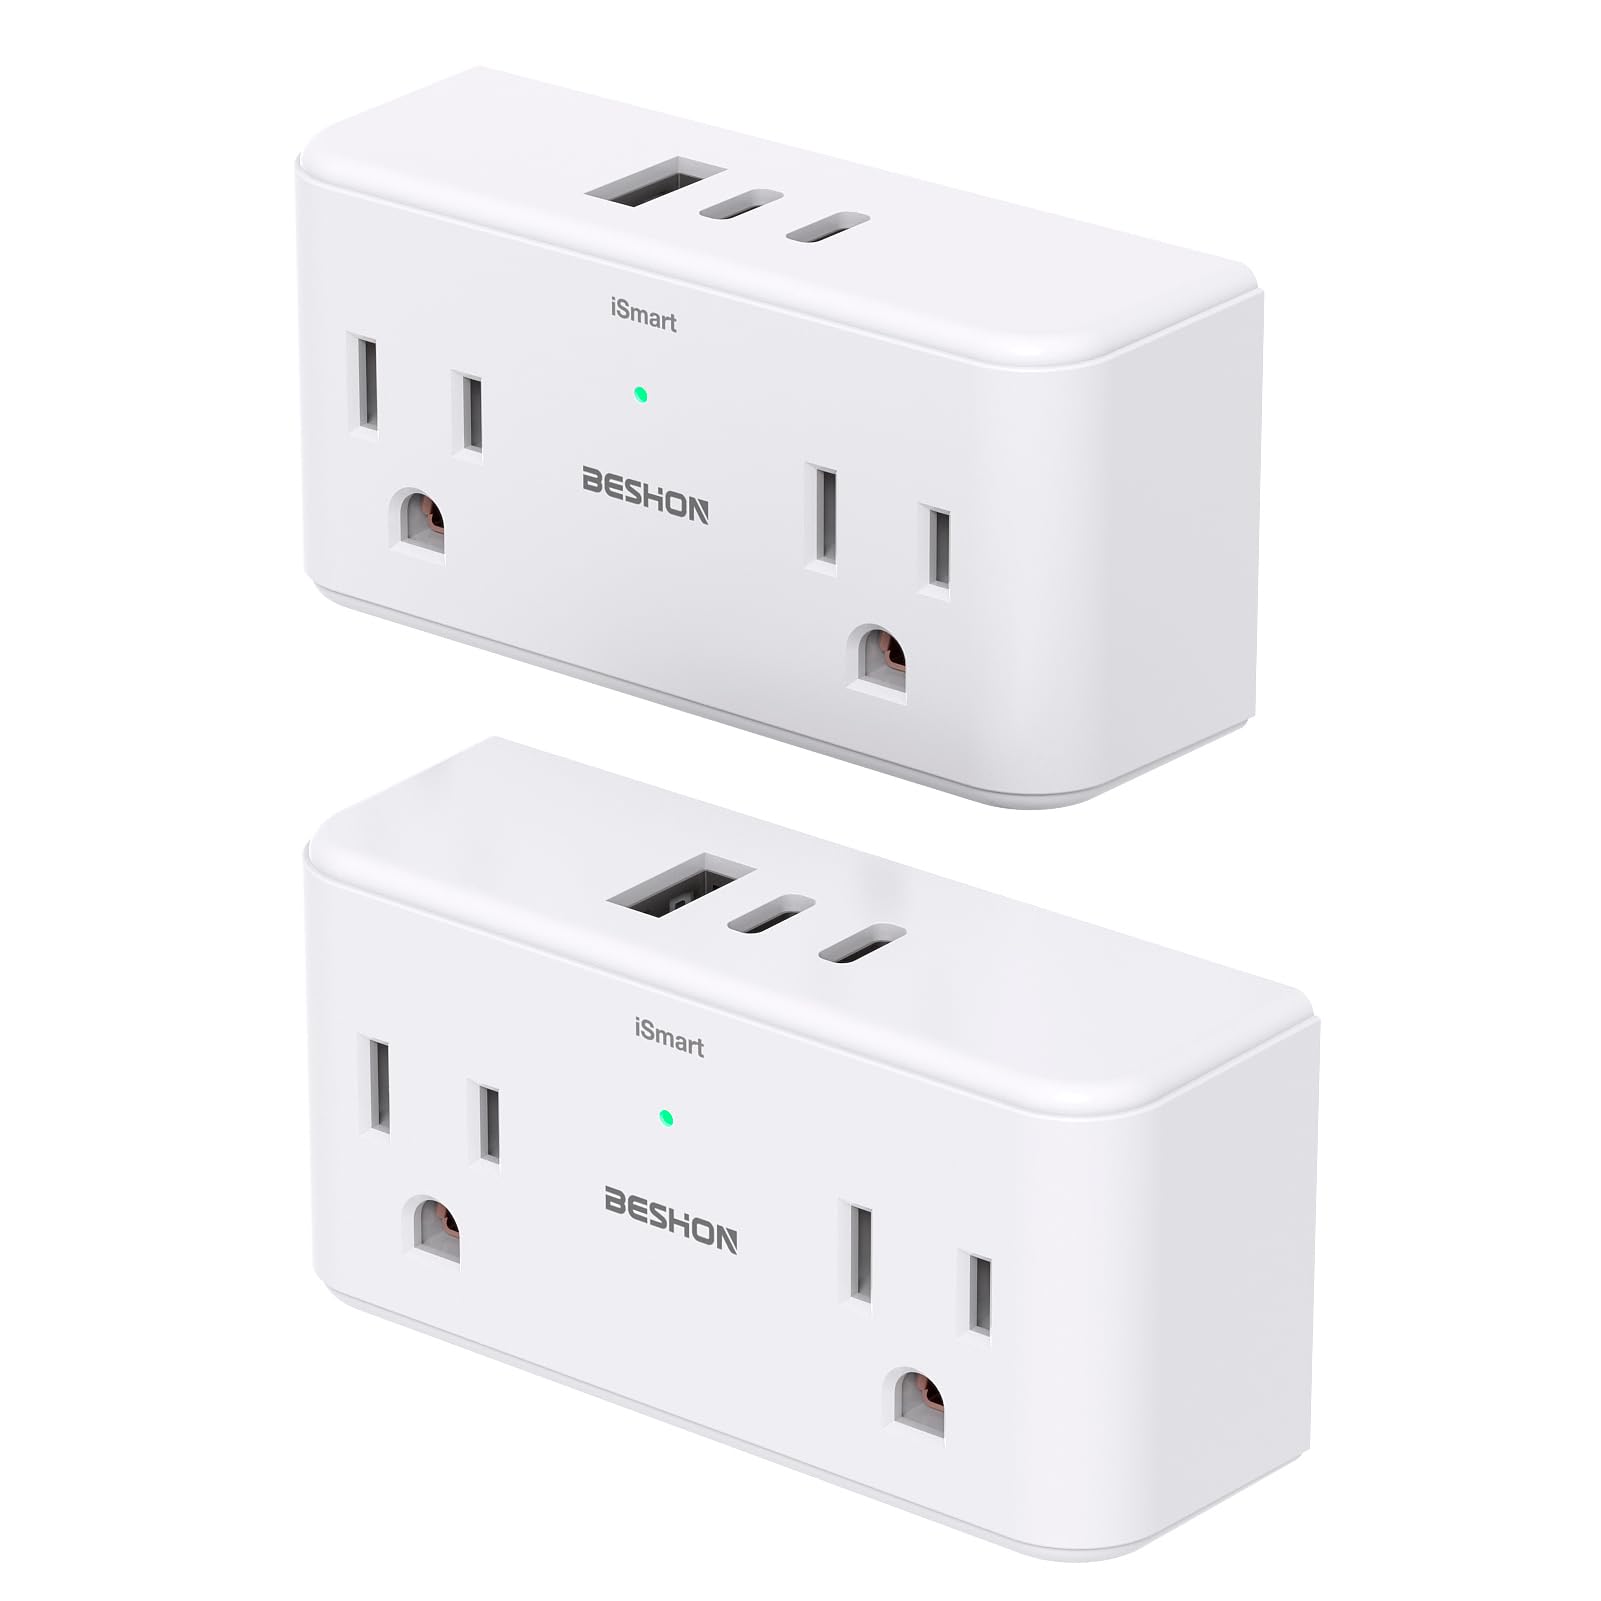 (prime only) 2-Pack Beshon Multi Plug Outlet Splitter w/ 3 USB Ports (2x USB-C) $8 at Amazon